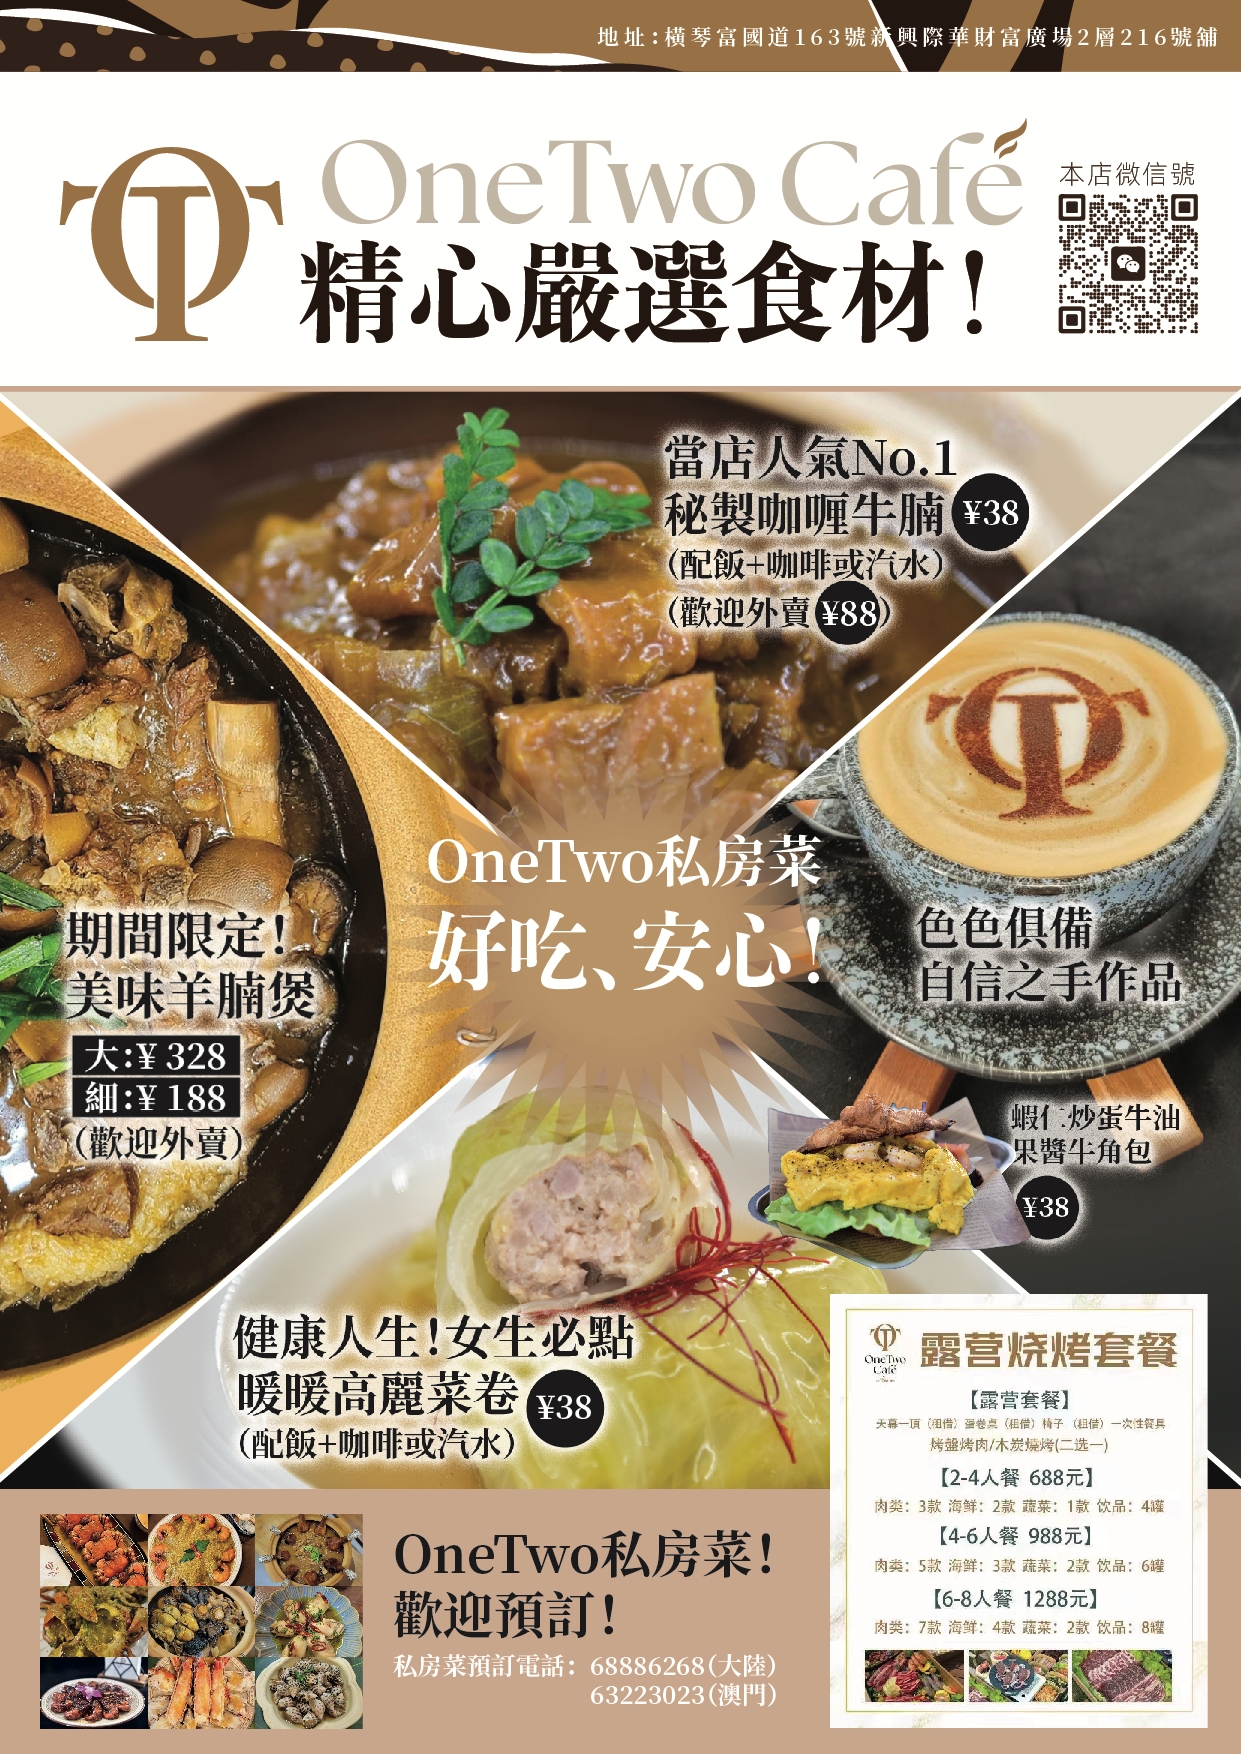 onetwo cafe3.jpg